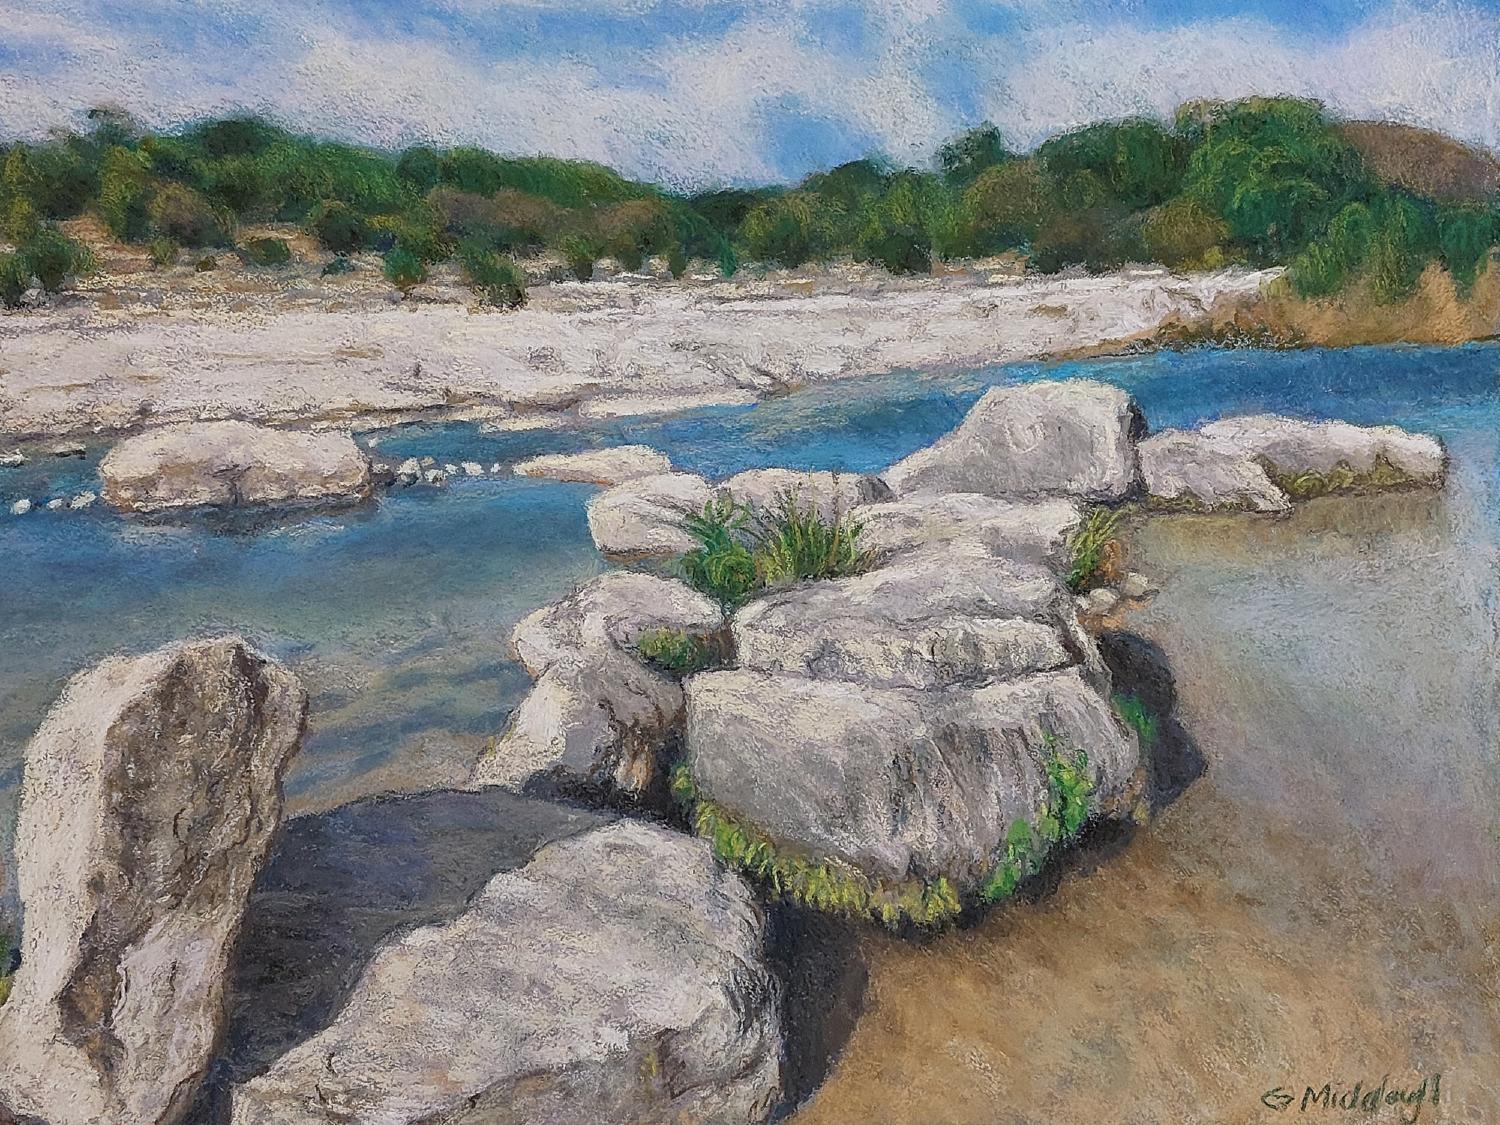  On the Frio River, Landscape, Pastel, Realism, Texas Artist, Texas Hill Country - Painting by Garrett Middaugh